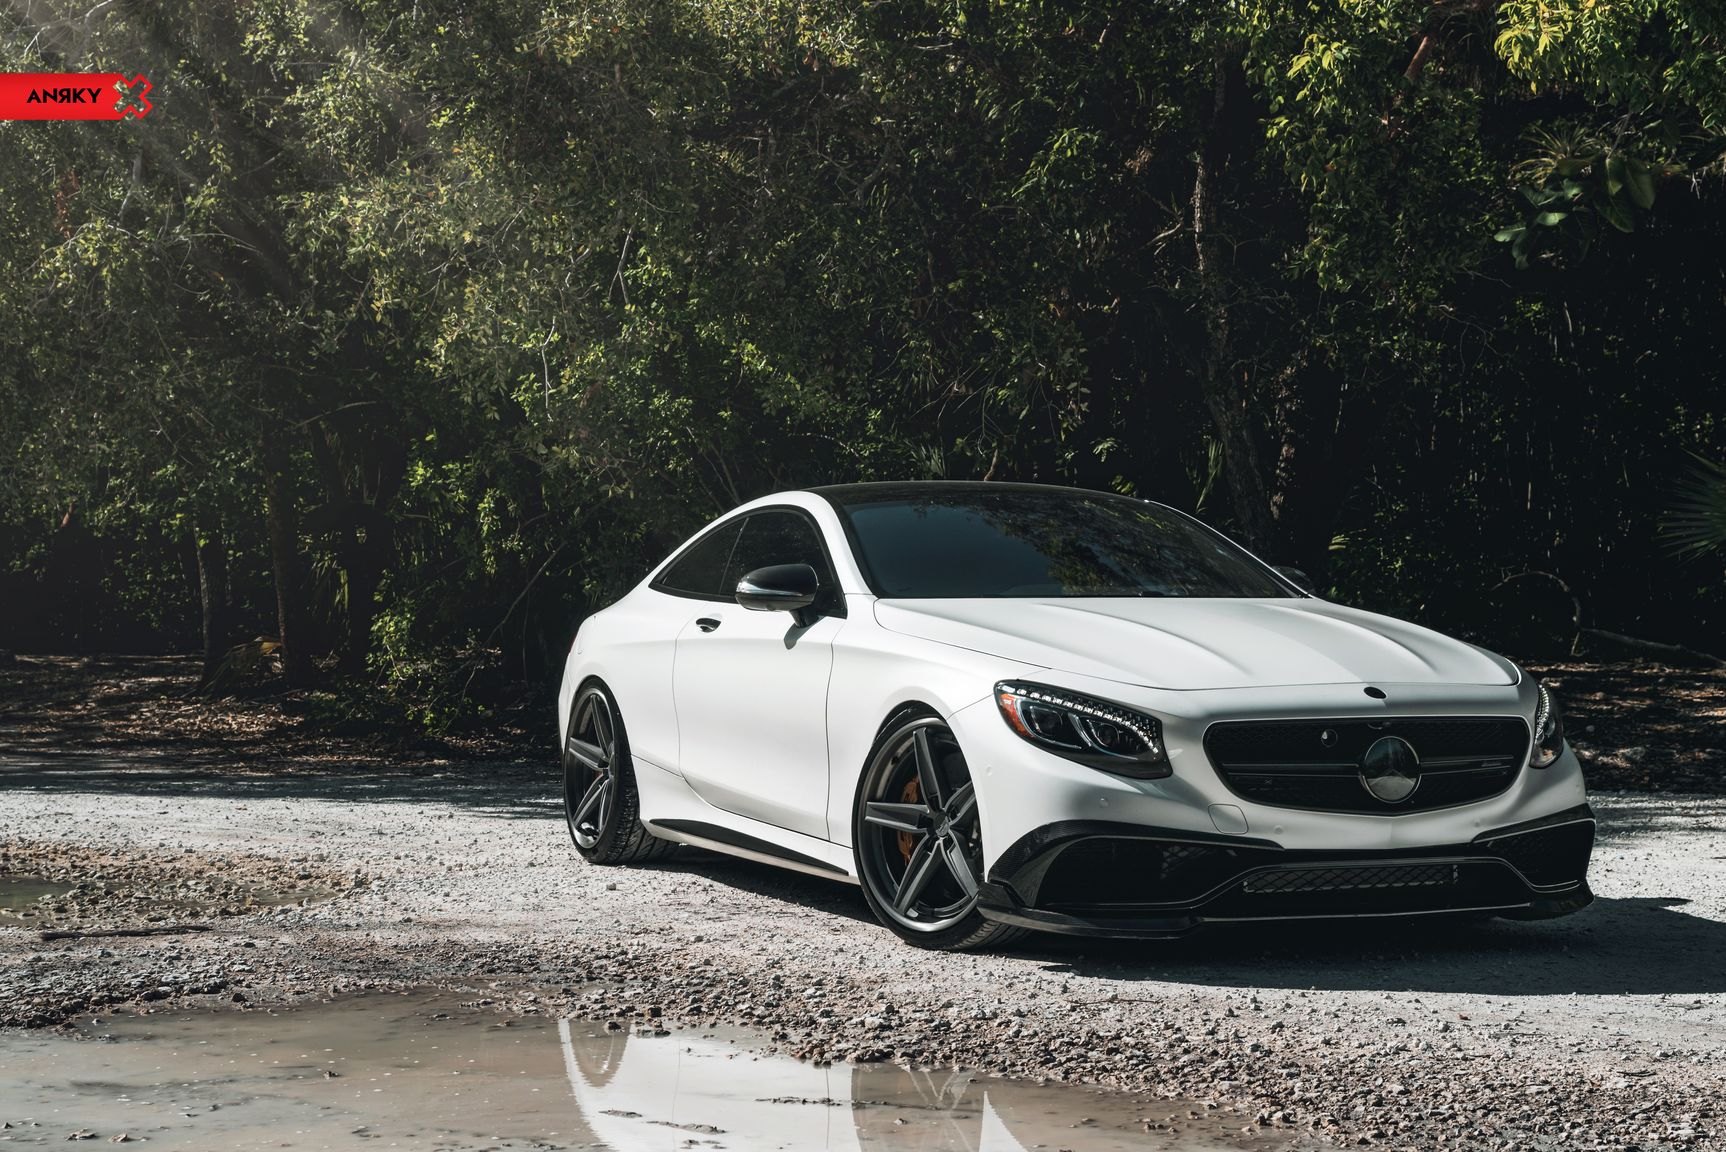 White Mercedes S Class with Custom Blacked Out Grille - Photo by Anrky Wheels